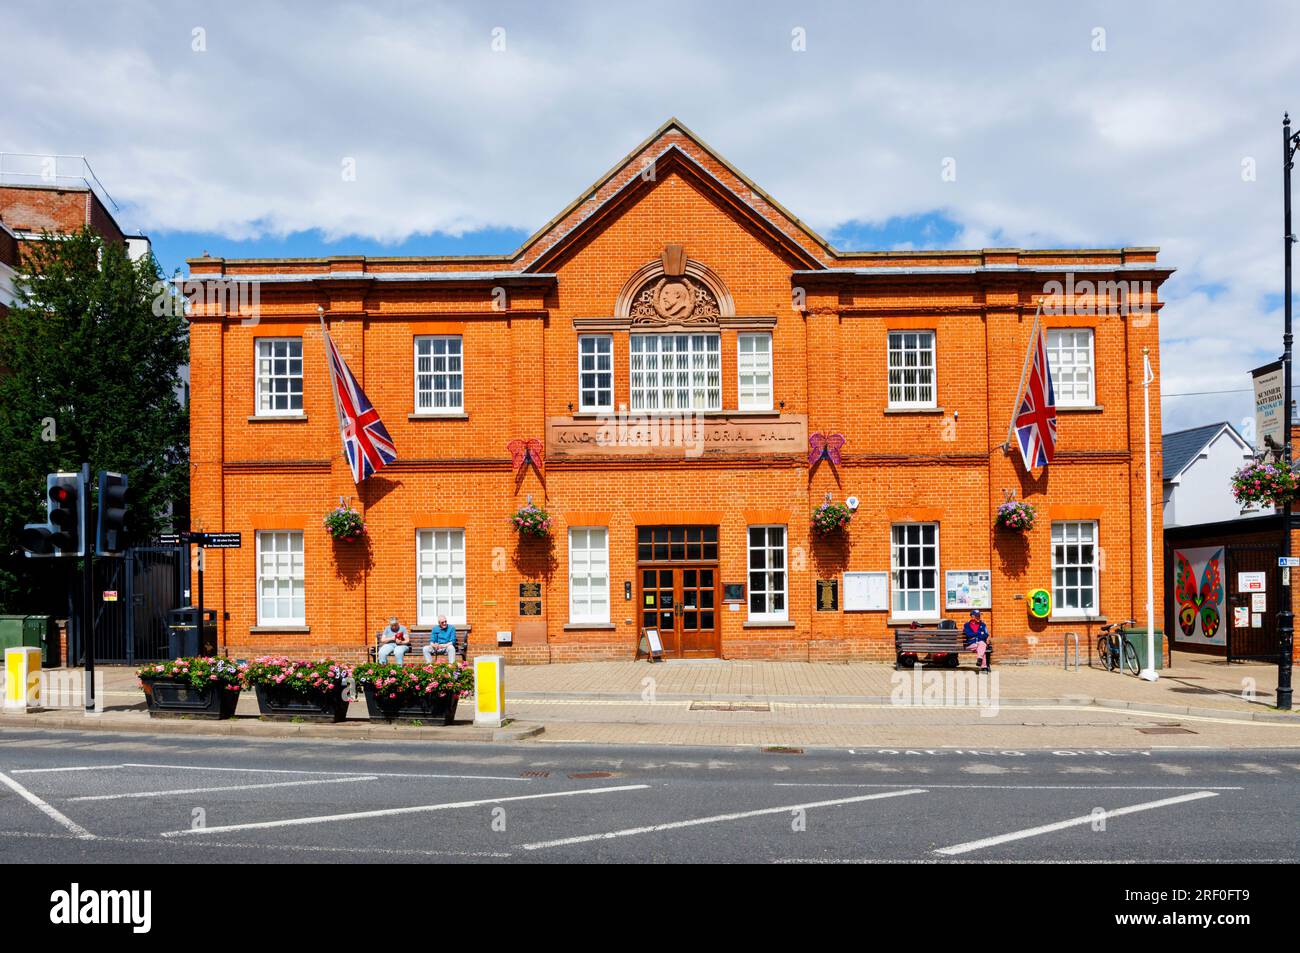 The King Edward VII Memorial Hall in High Street, Newmarket, a market town in the West Suffolk district of Suffolk, east England Stock Photo